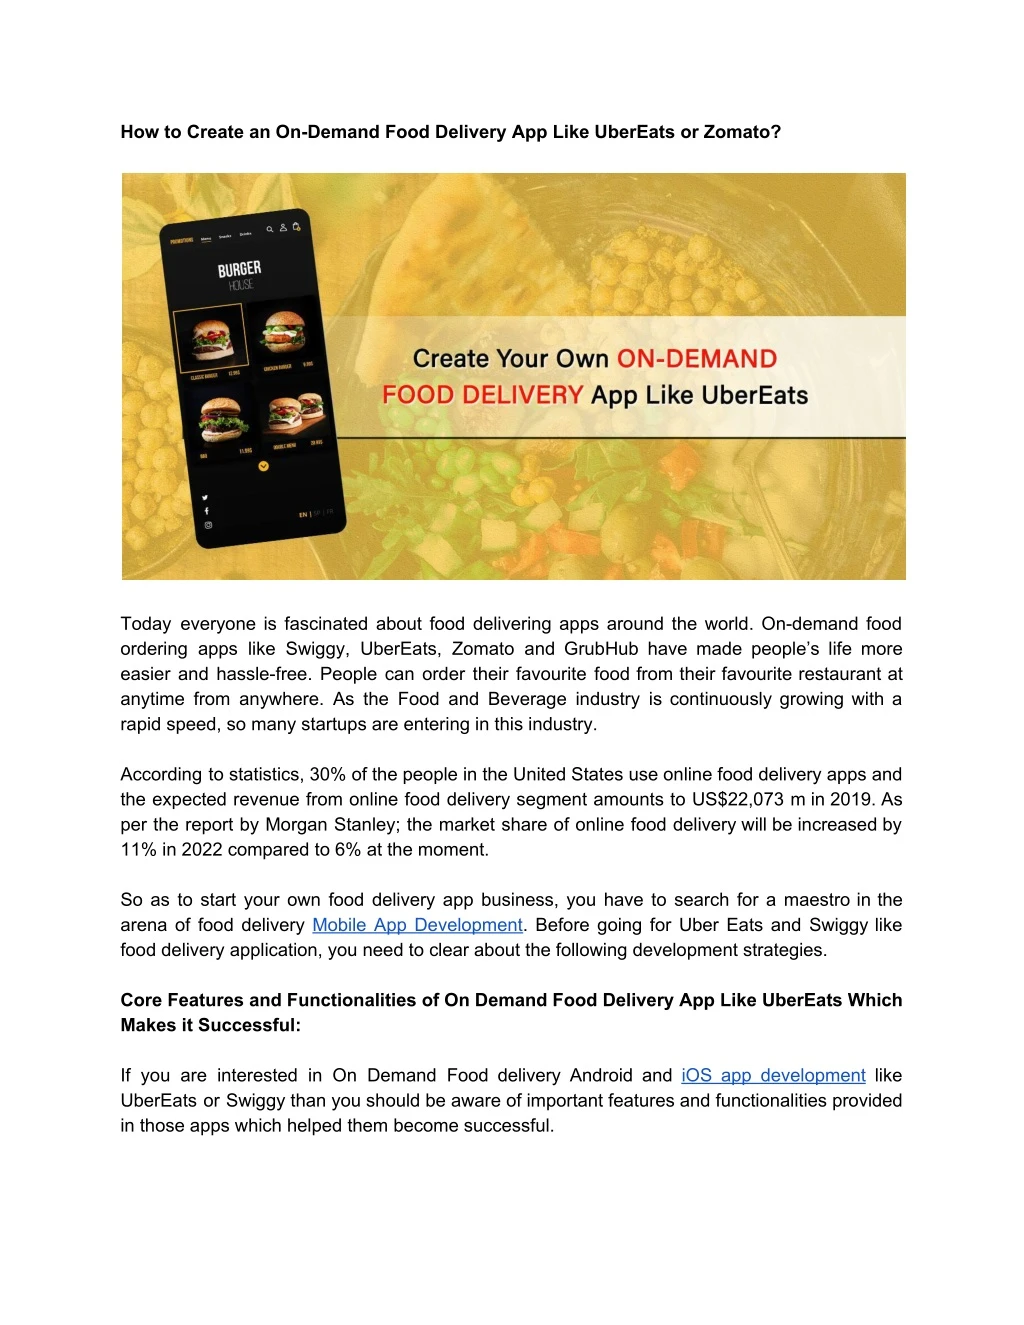 how to create an on demand food delivery app like